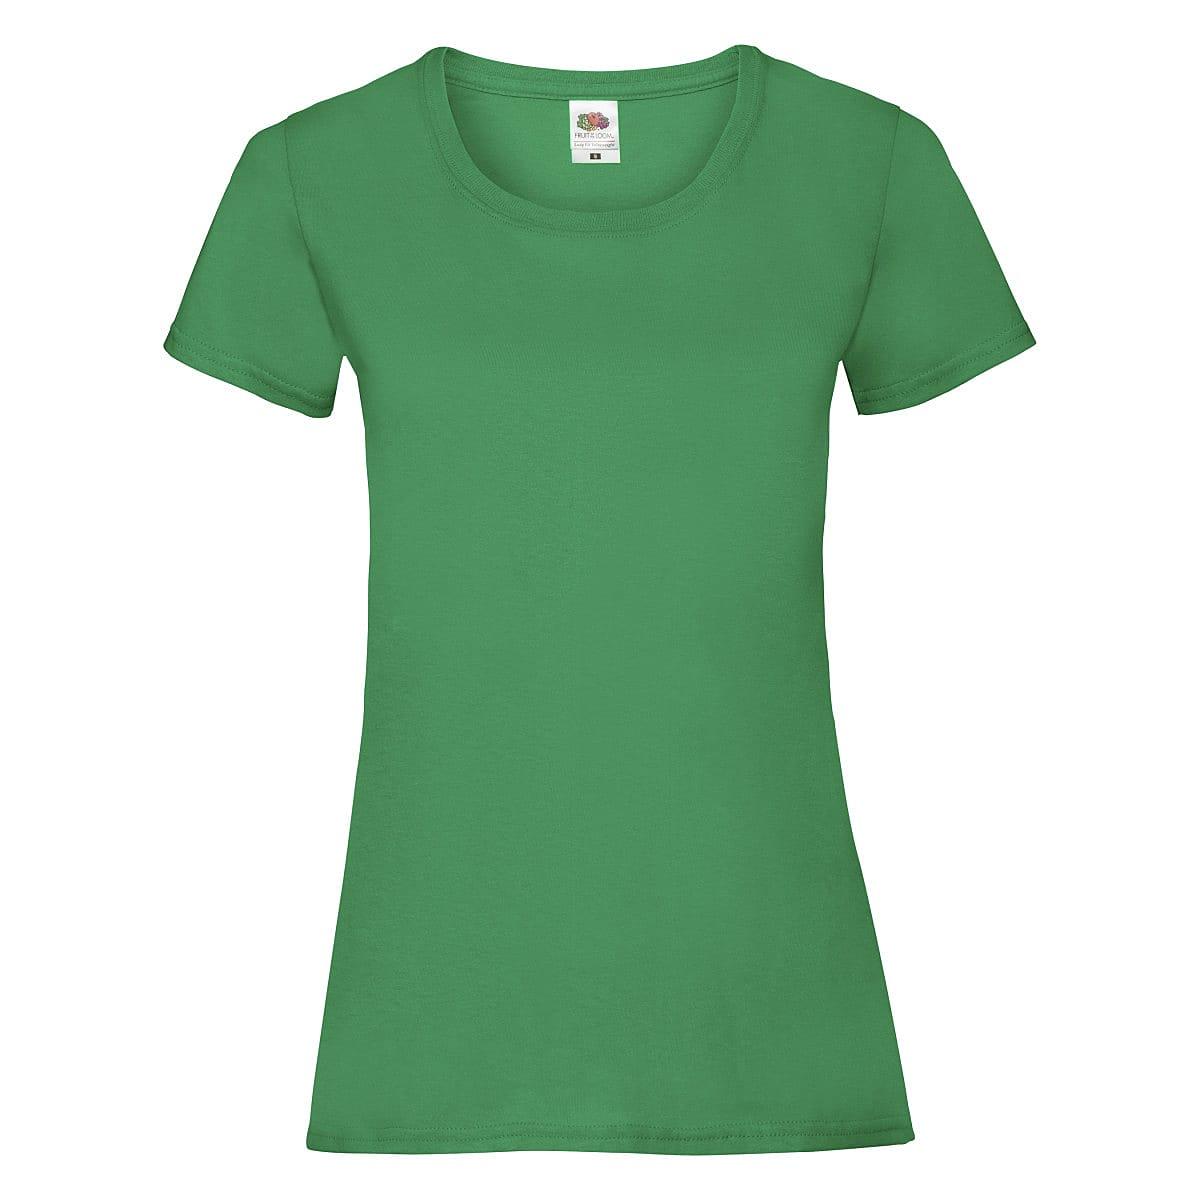 Fruit Of The Loom Lady-Fit Valueweight T-Shirt in Kelly Green (Product Code: 61372)